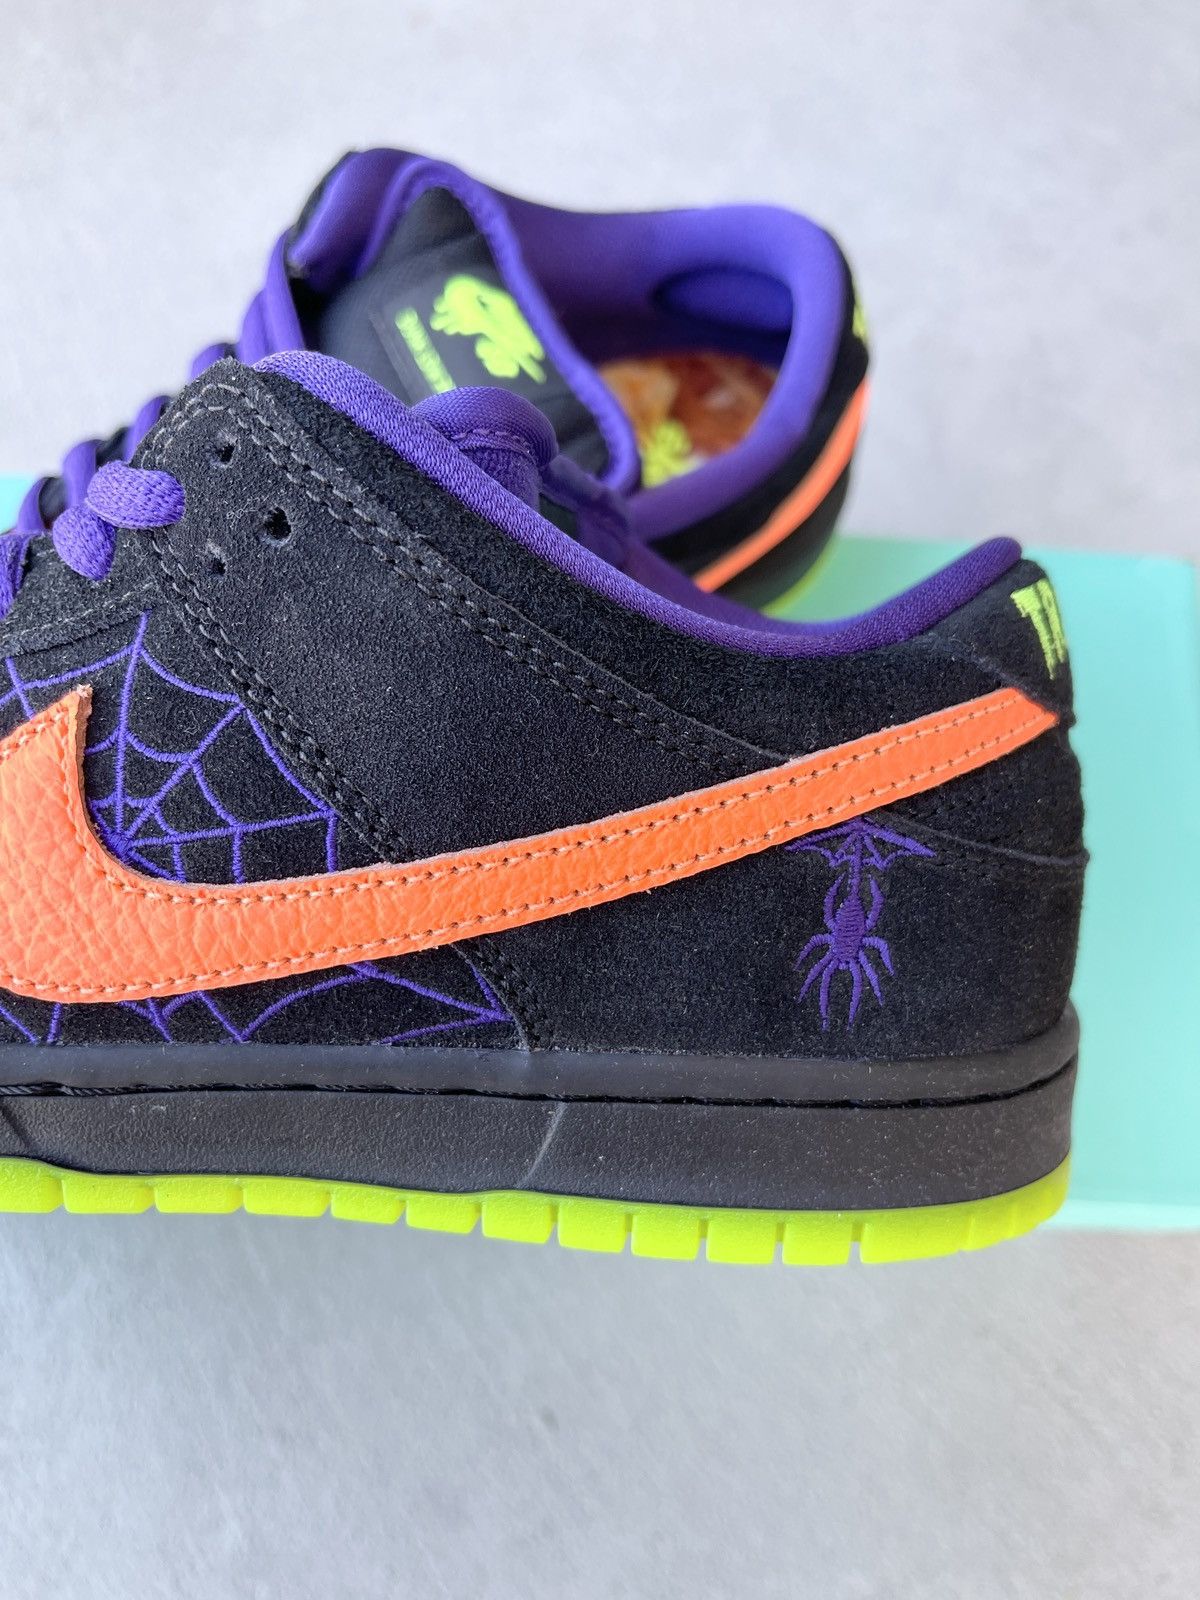 2019 Nike Dunk SB Low “Night of Mischeif” - Size 7 - 3